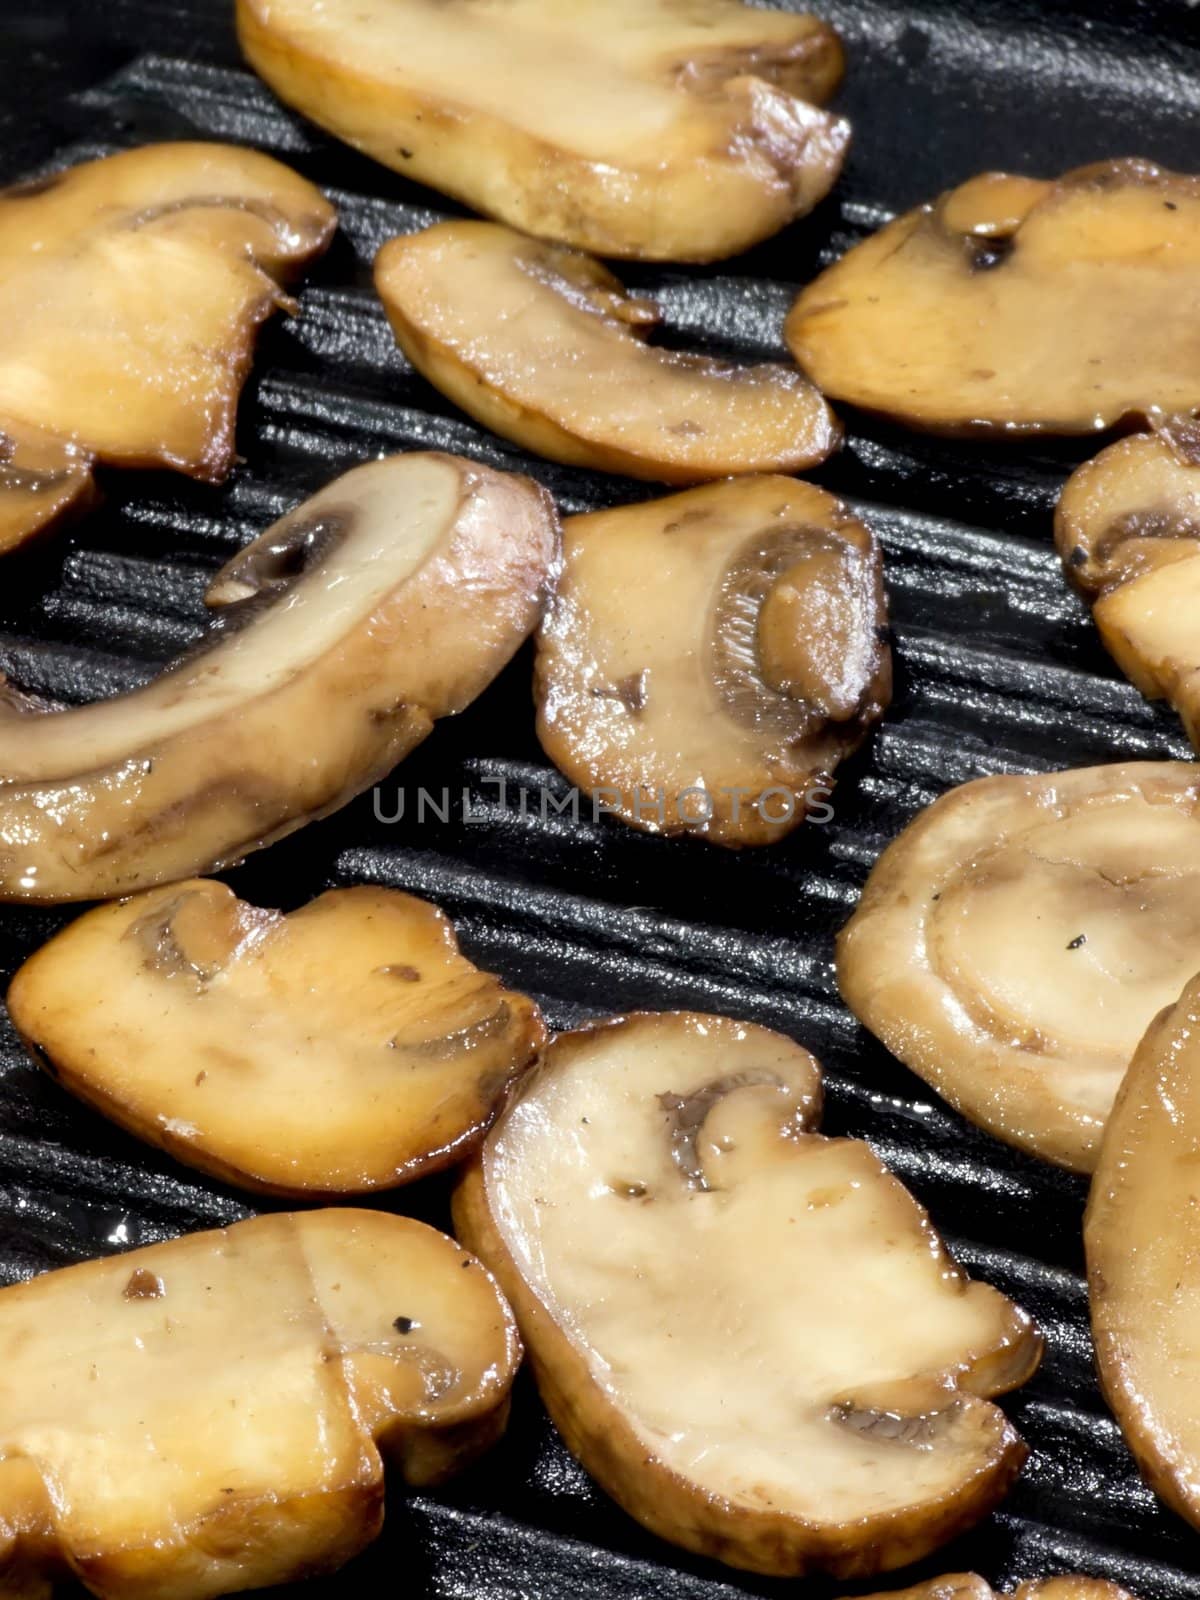 sauteed mushrooms on a grill by zkruger